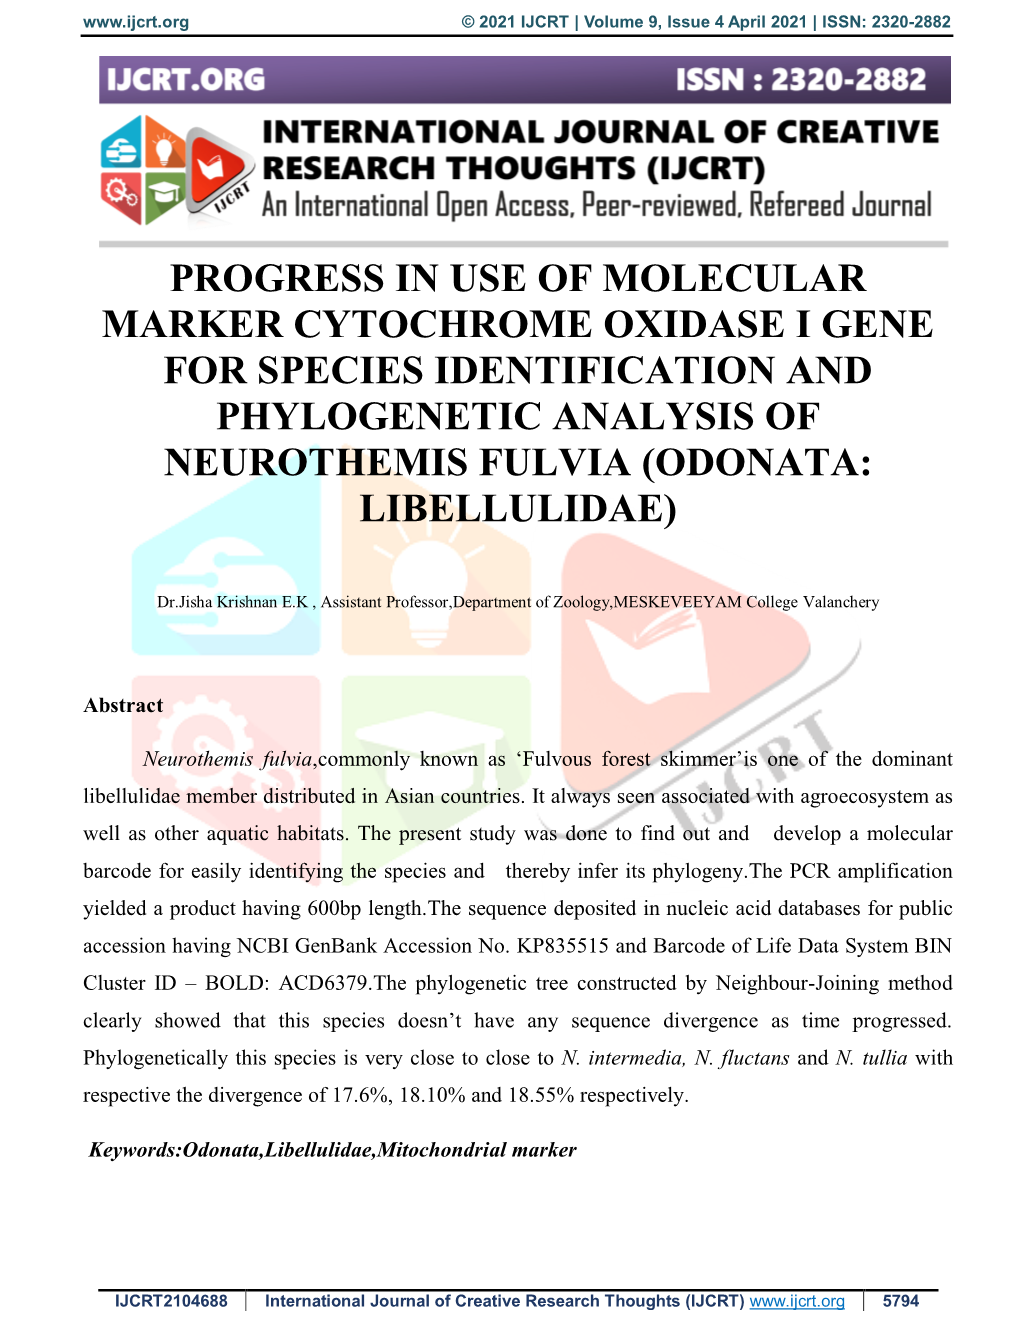 Progress in Use of Molecular Marker Cytochrome Oxidase I Gene for Species Identification and Phylogenetic Analysis of Neurothemis Fulvia (Odonata: Libellulidae)